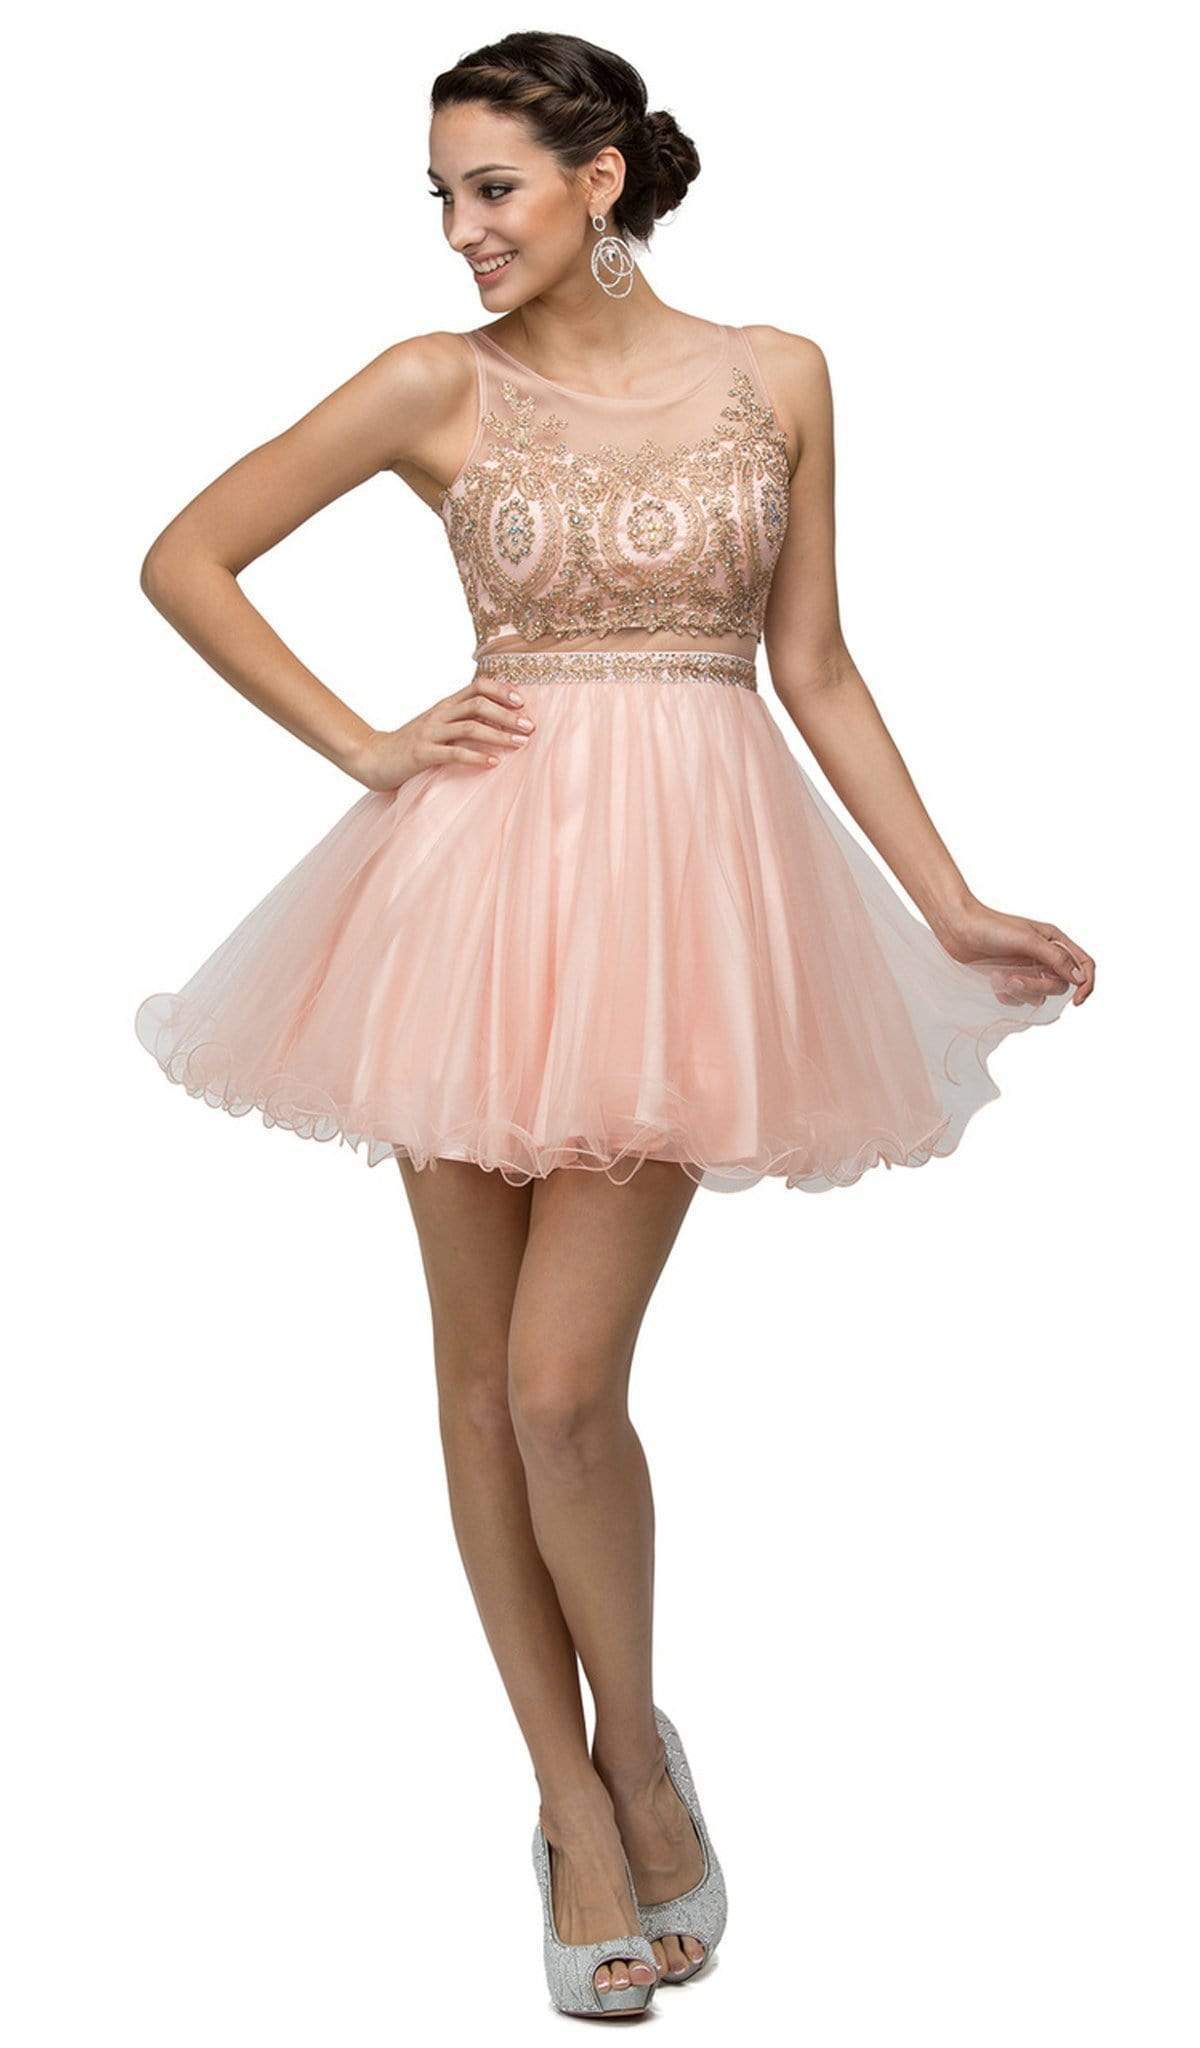 Dancing Queen - 9518 Lace Embellished Illusion A-Line Short Prom Dress